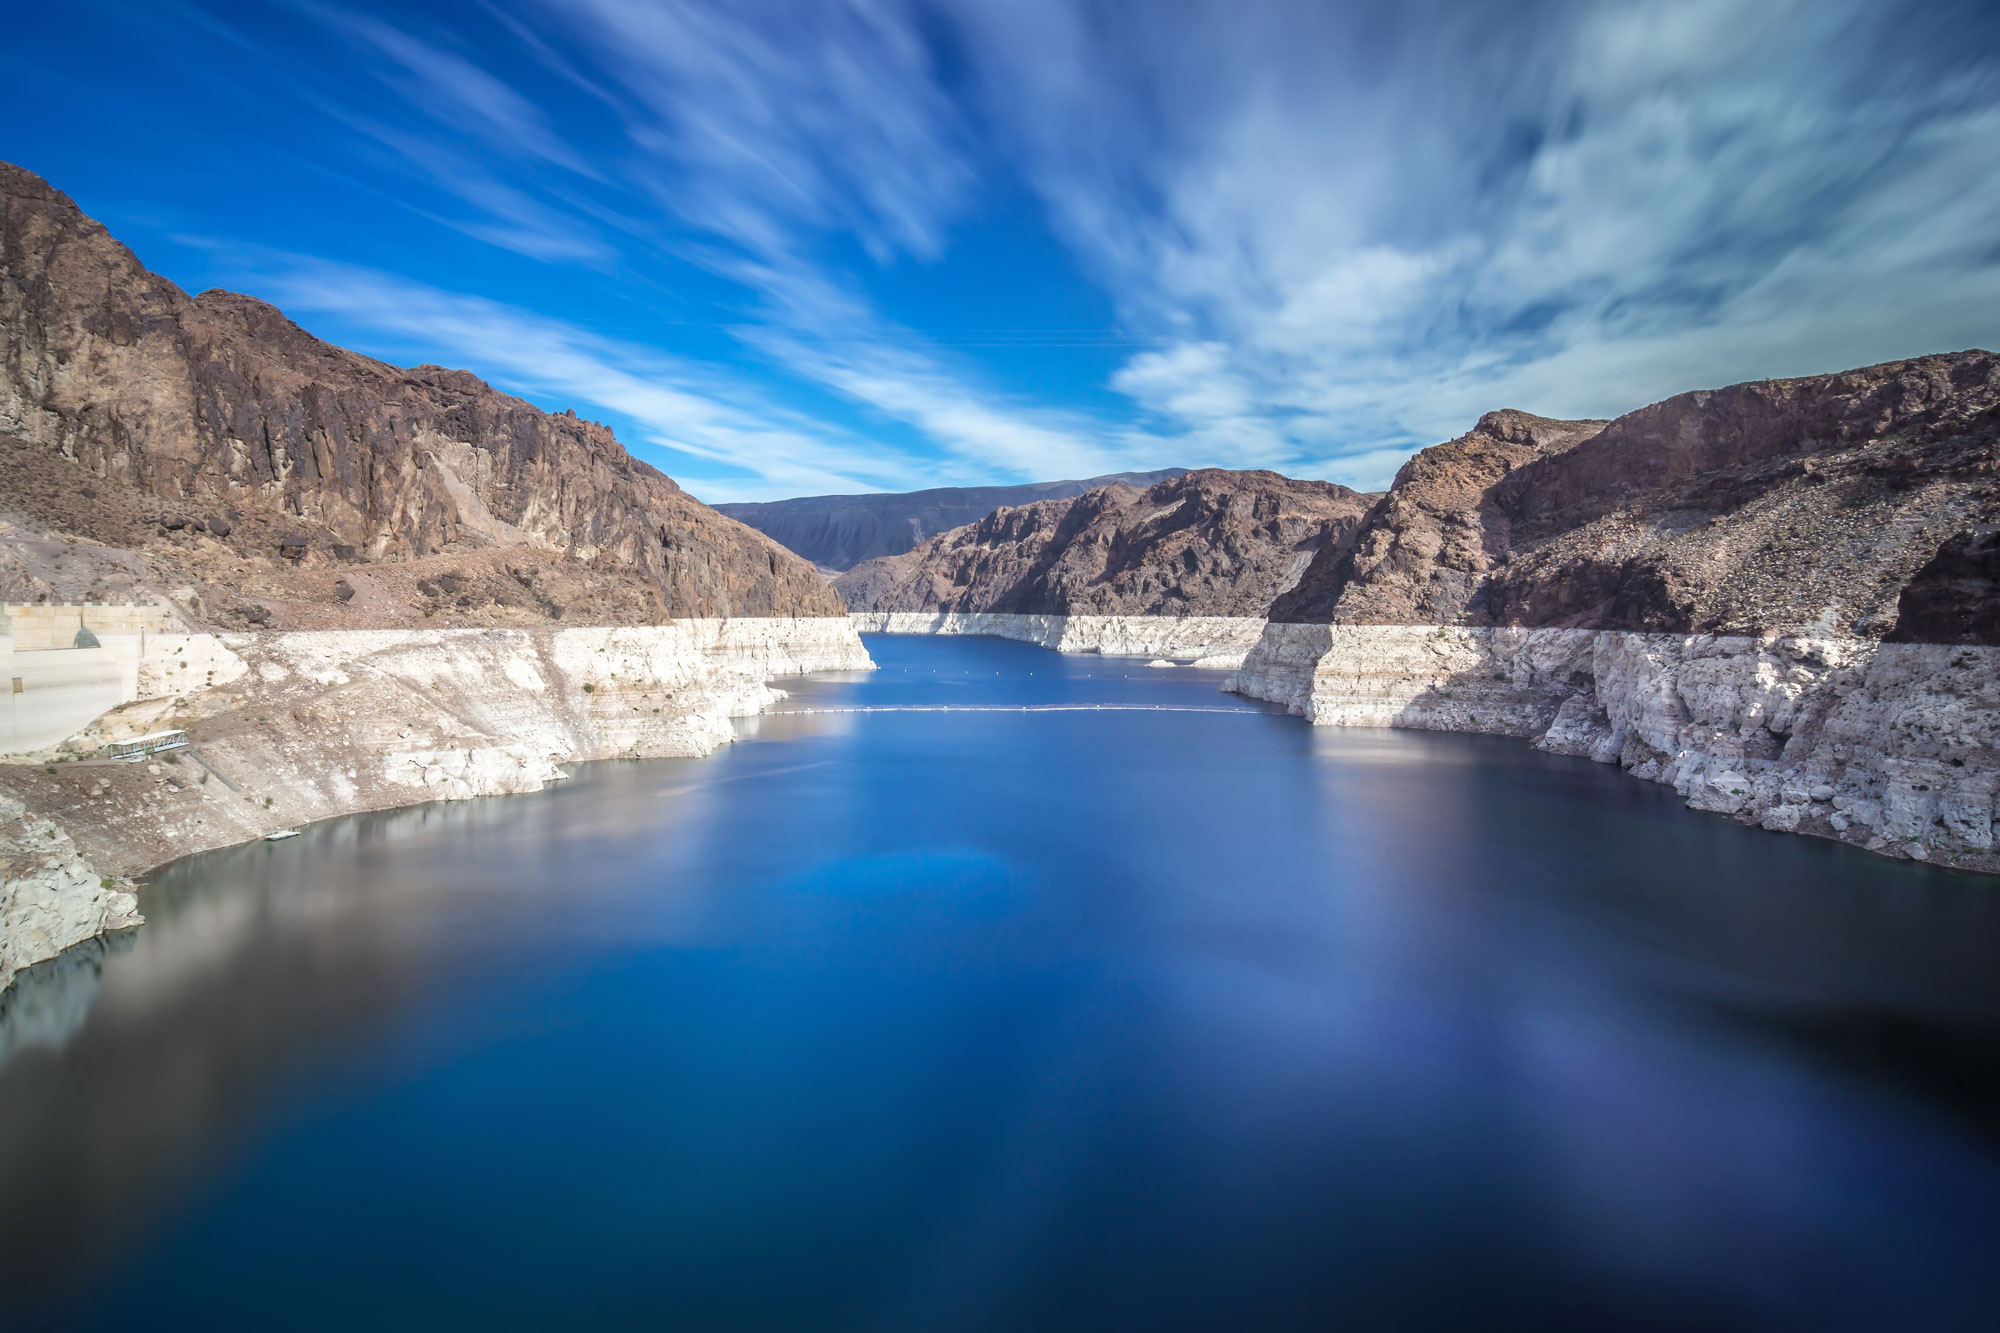 The Colorado River’s Hydrology is Changing. Can We Adapt?